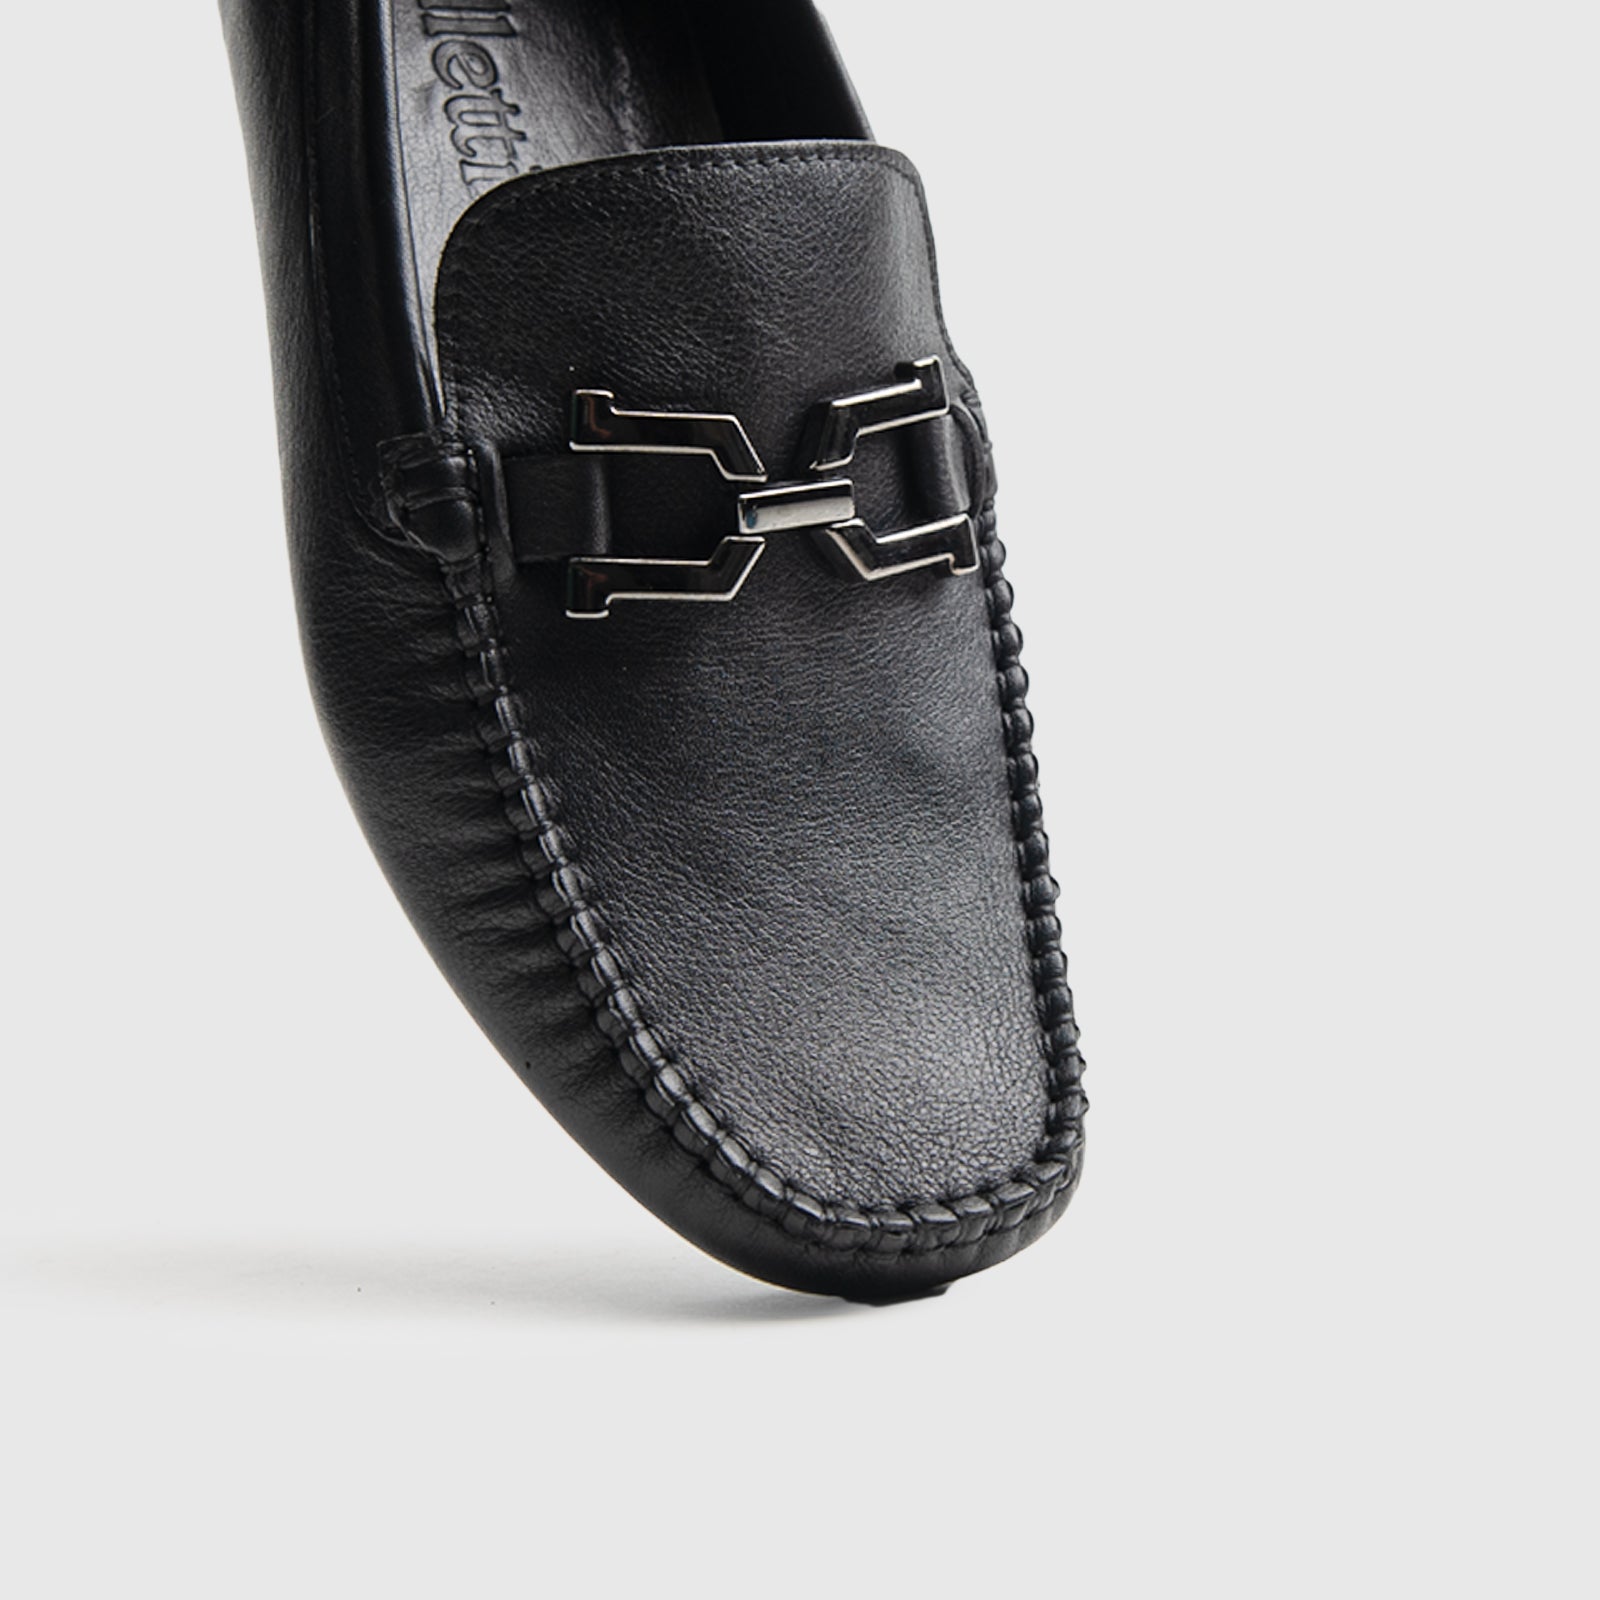 Dress/Casual Loafers 13664 Black Loafers | familyshoecentre